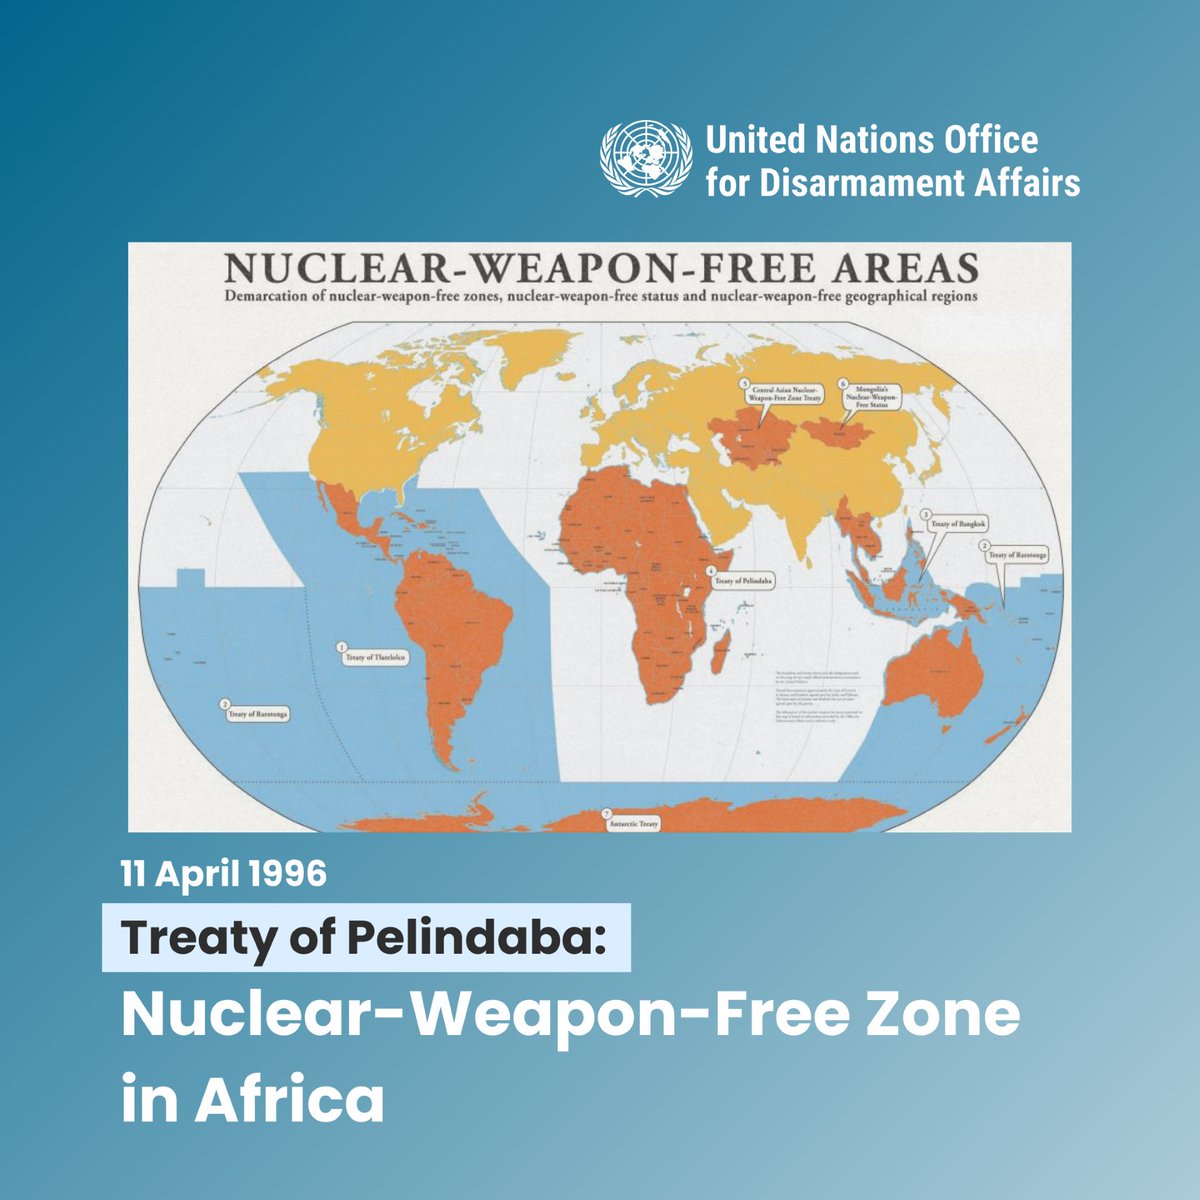 #ThrowbackThursday On this day in 1996, the Treaty of Pelindaba was opened for signature in Cairo, Egypt. 🇪🇬 The Treaty established a Nuclear-Weapon-Free Zone (NWFZ) in Africa, as a measure that contributes to global non-proliferation and disarmament efforts. 💡Learn more…